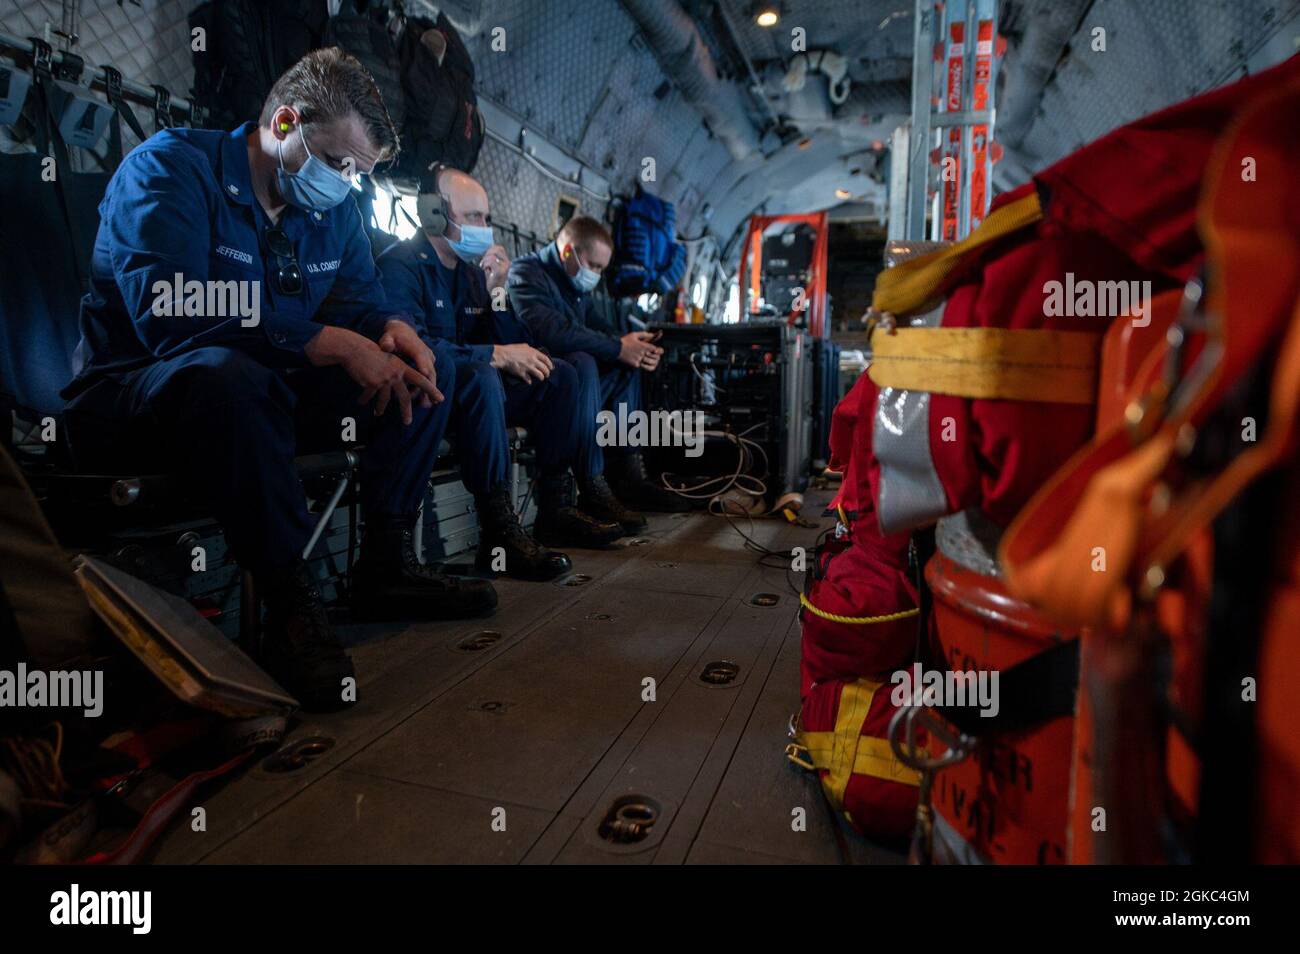 Members with Base Alameda clinic rest during a flight on a Coast Guard Air Station Sacramento C-27J Spartan aircraft from Oakland to San Diego, March 9, 2021. The clinic crew members are responsible for transporting and distributing the vaccines to Coast Guard members in the San Diego area. Stock Photo